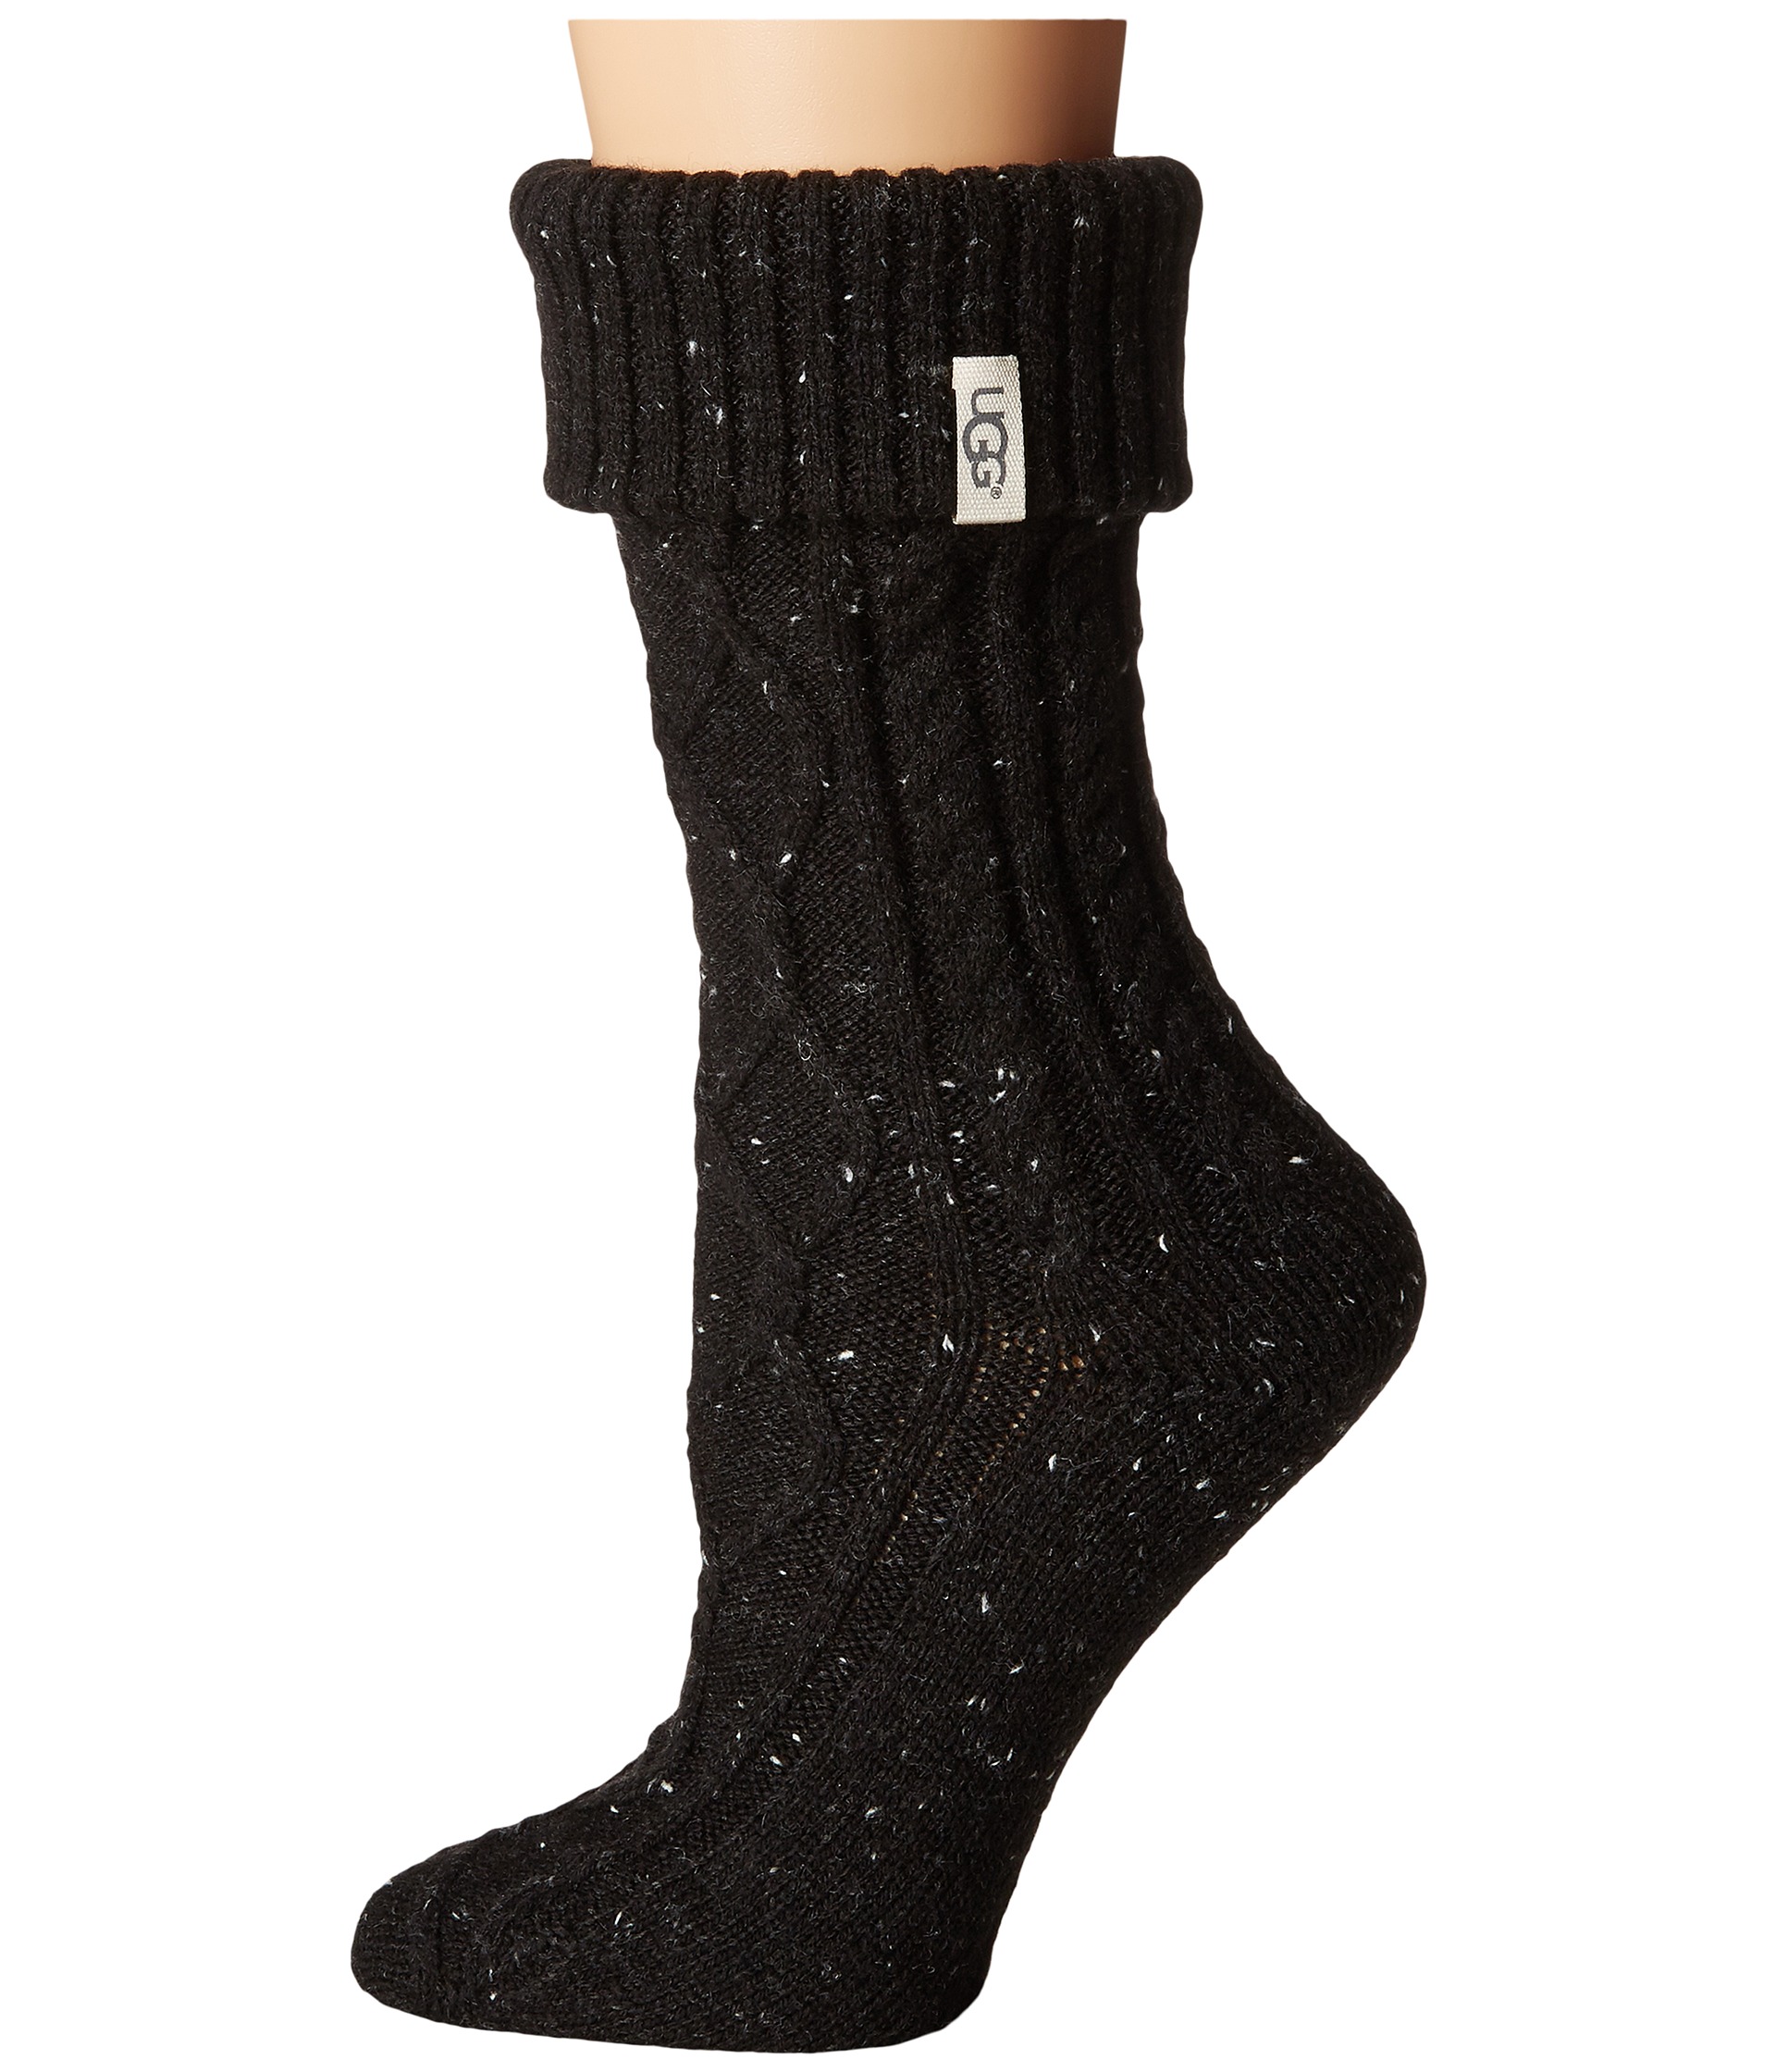 socks to wear with uggs 2